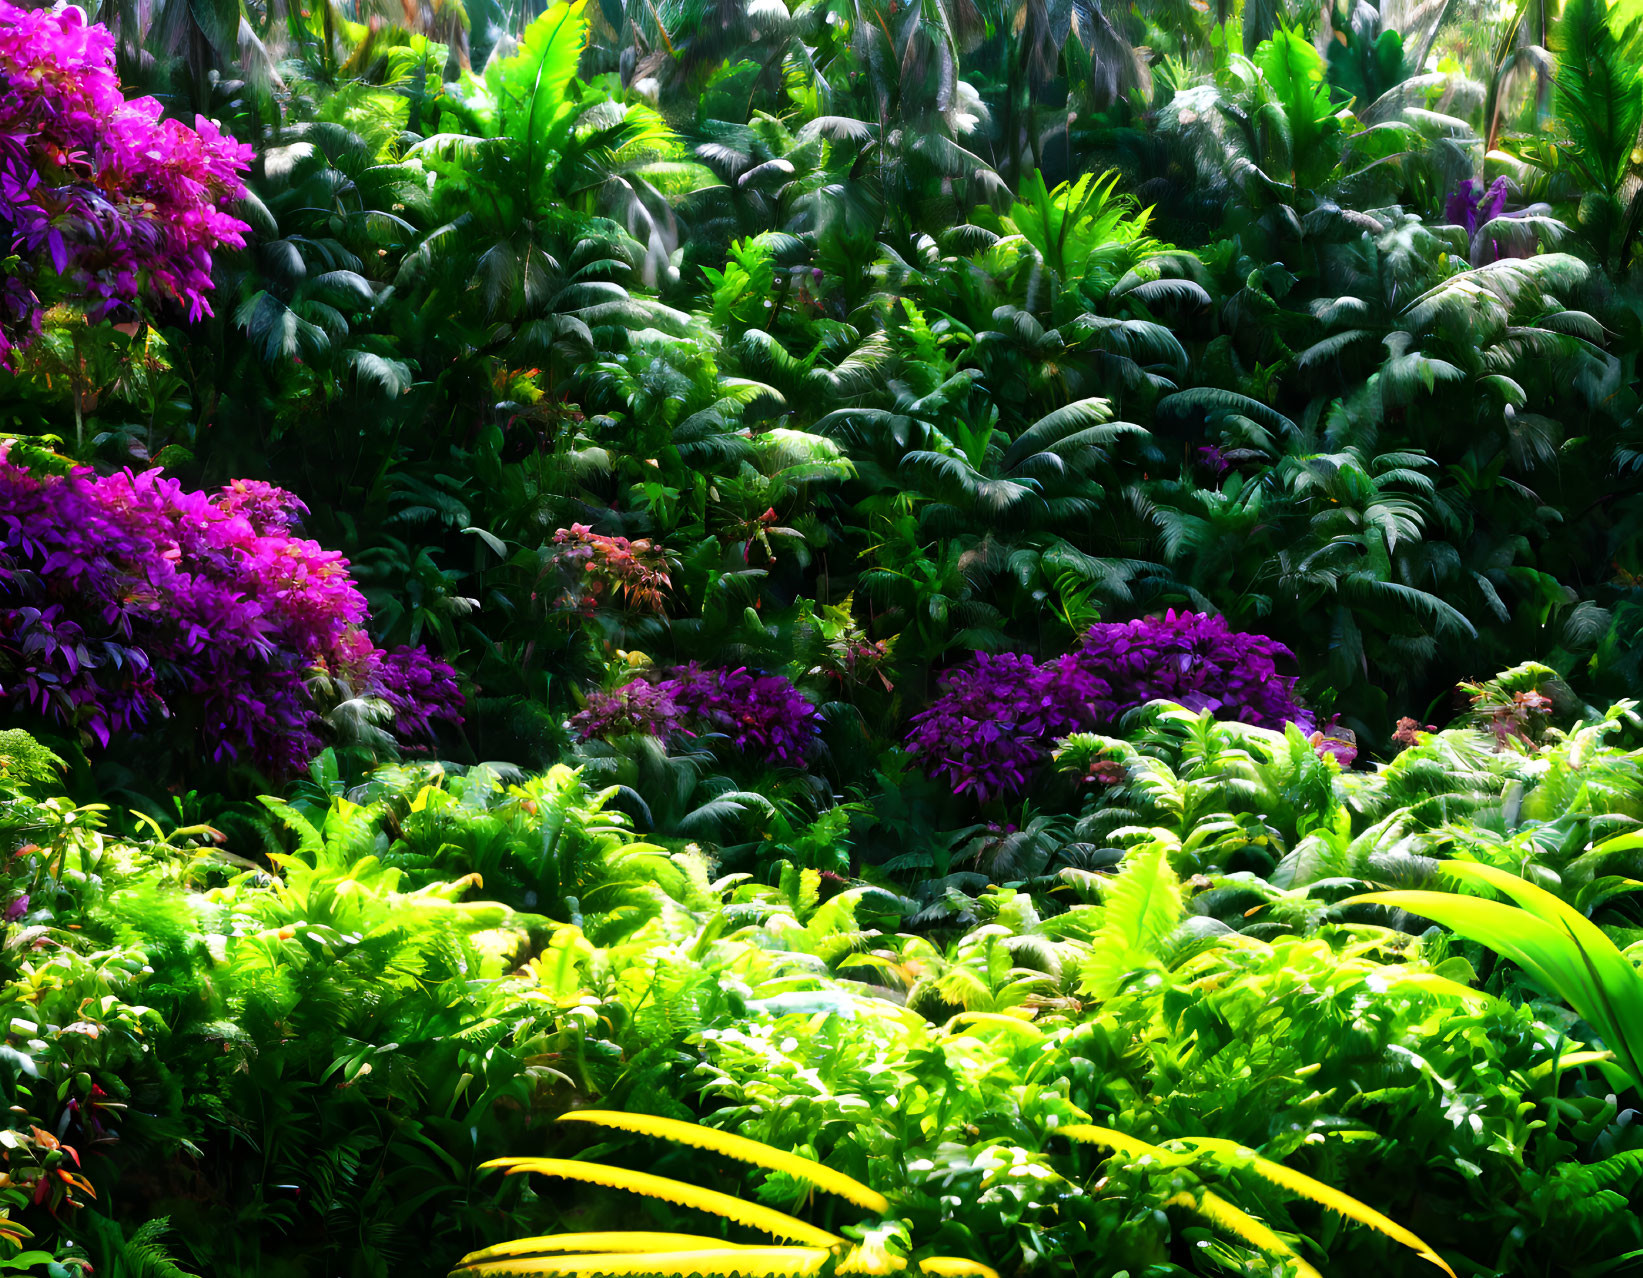 Lush Green Foliage and Bright Purple Flowers in Tropical Garden